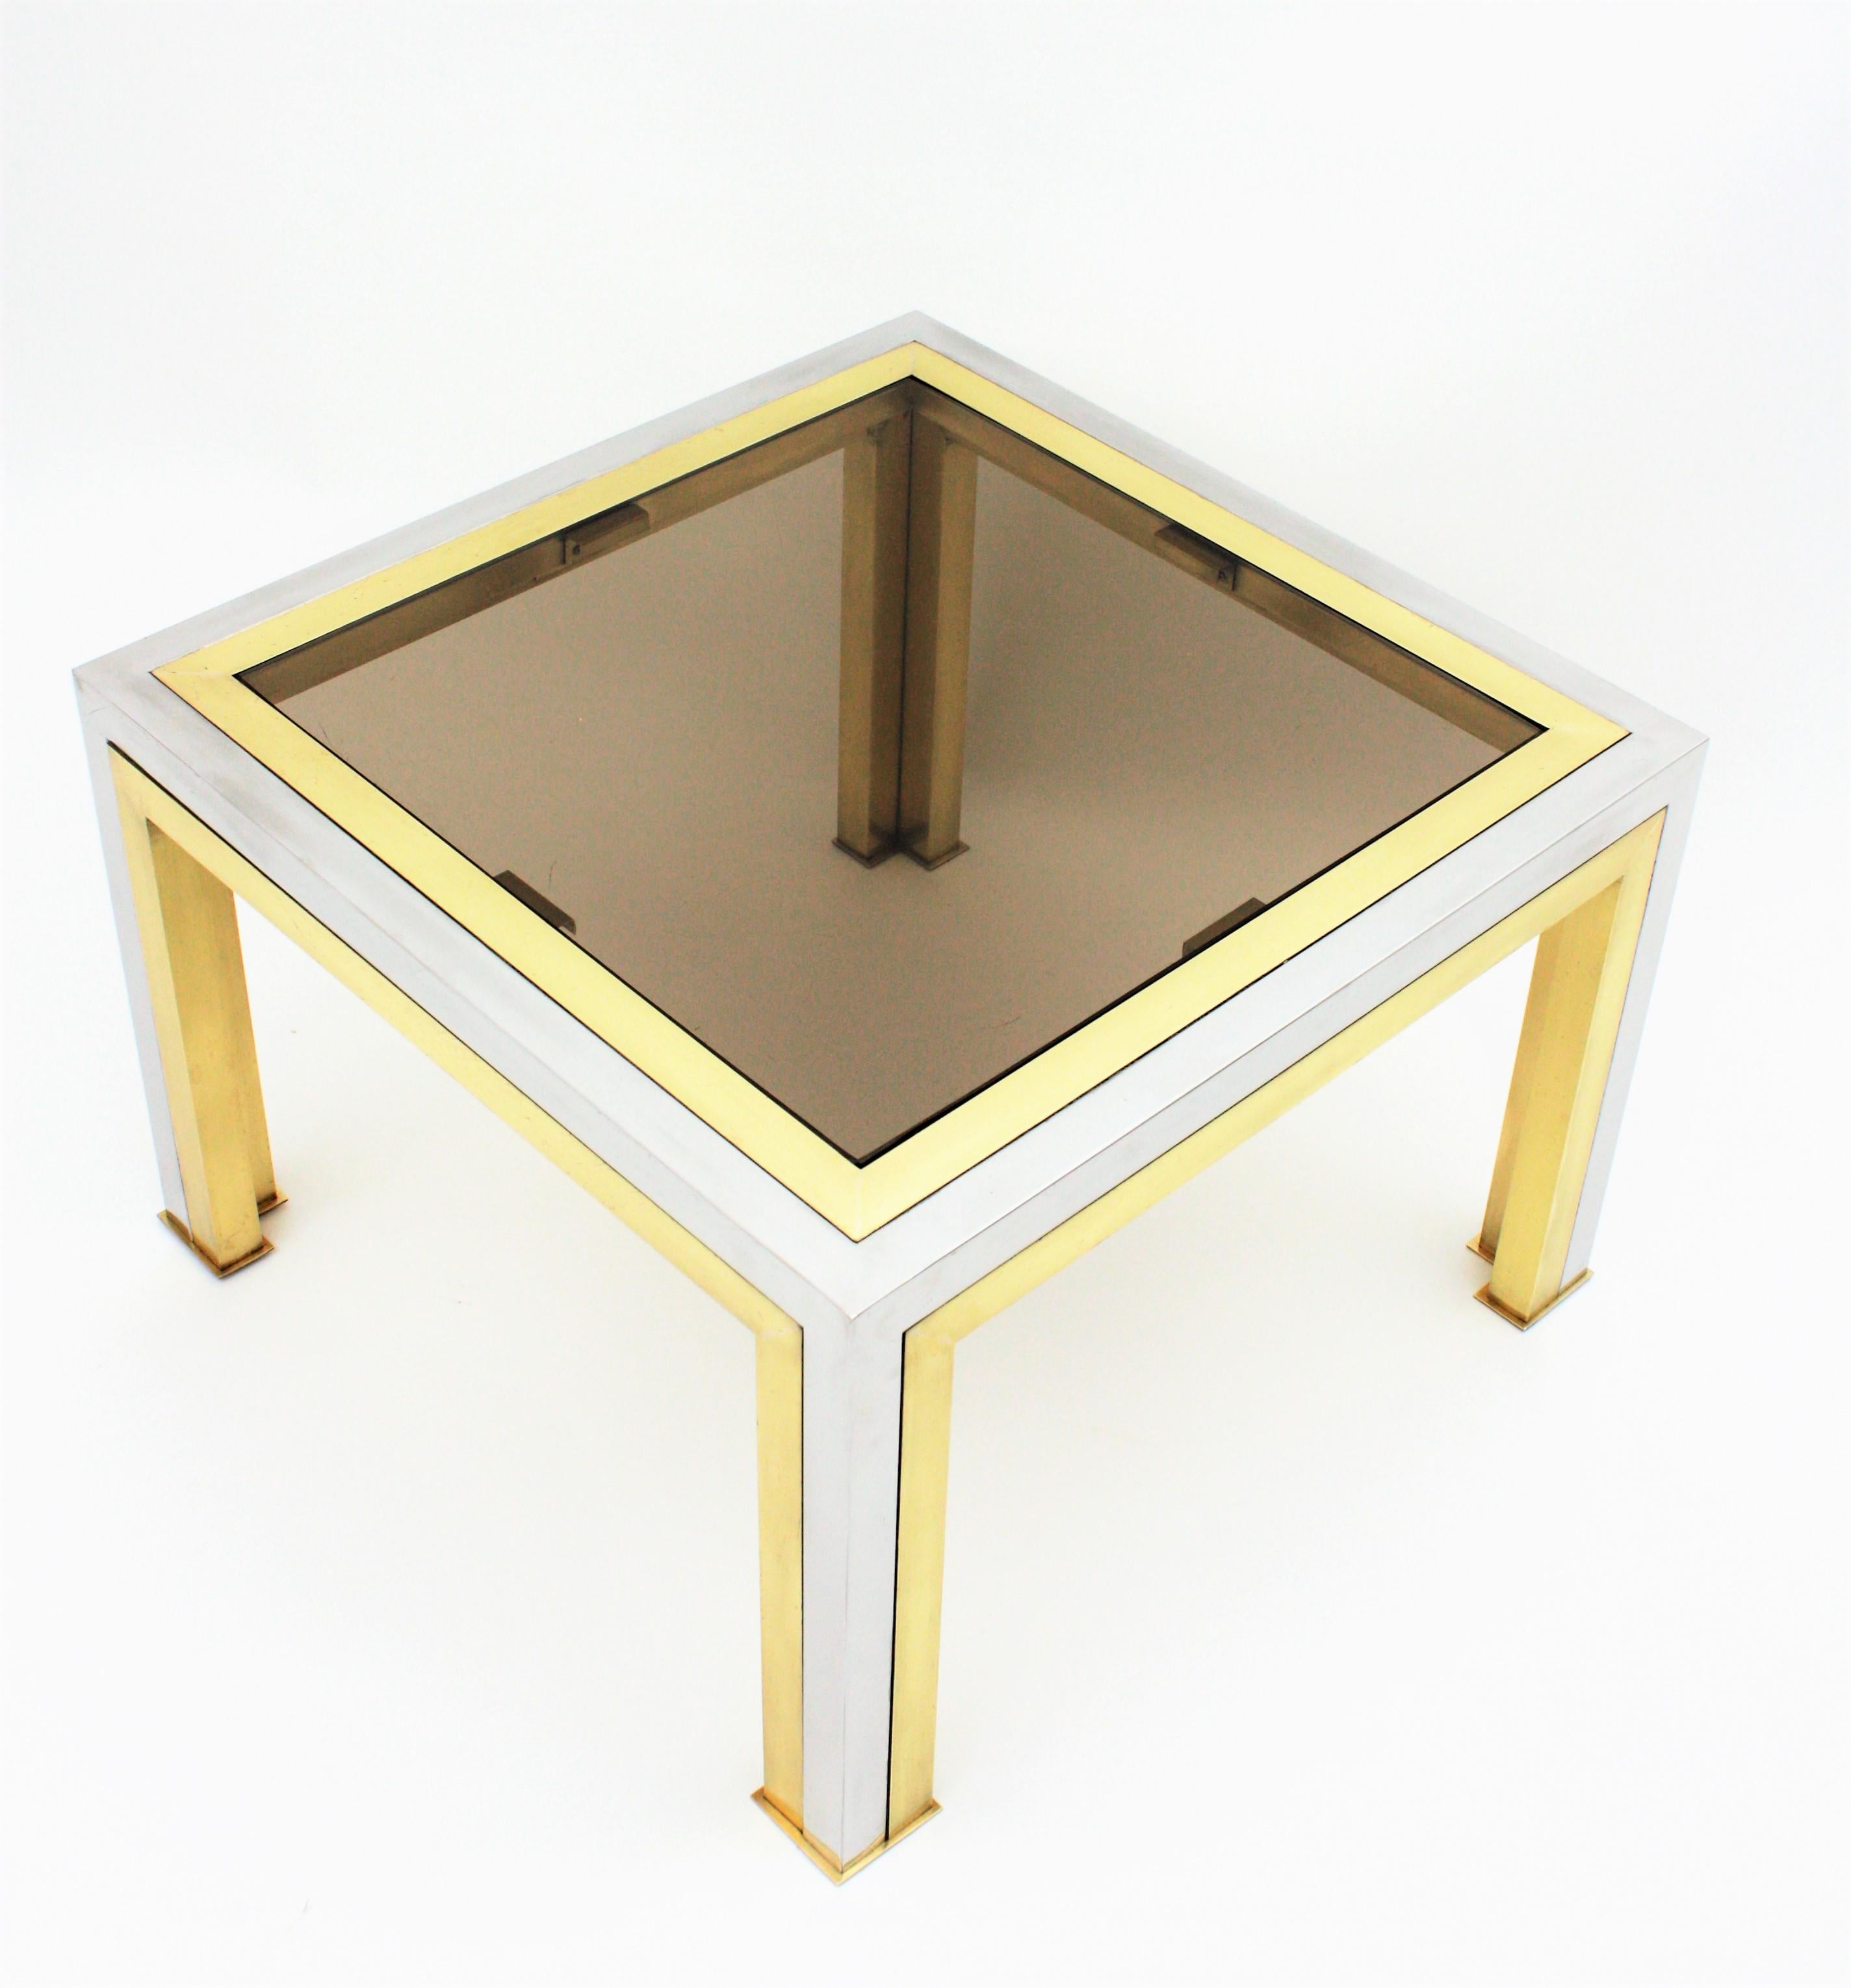 Romeo Rega Coffee Table in Brass, Chromed Steel and Glass 1